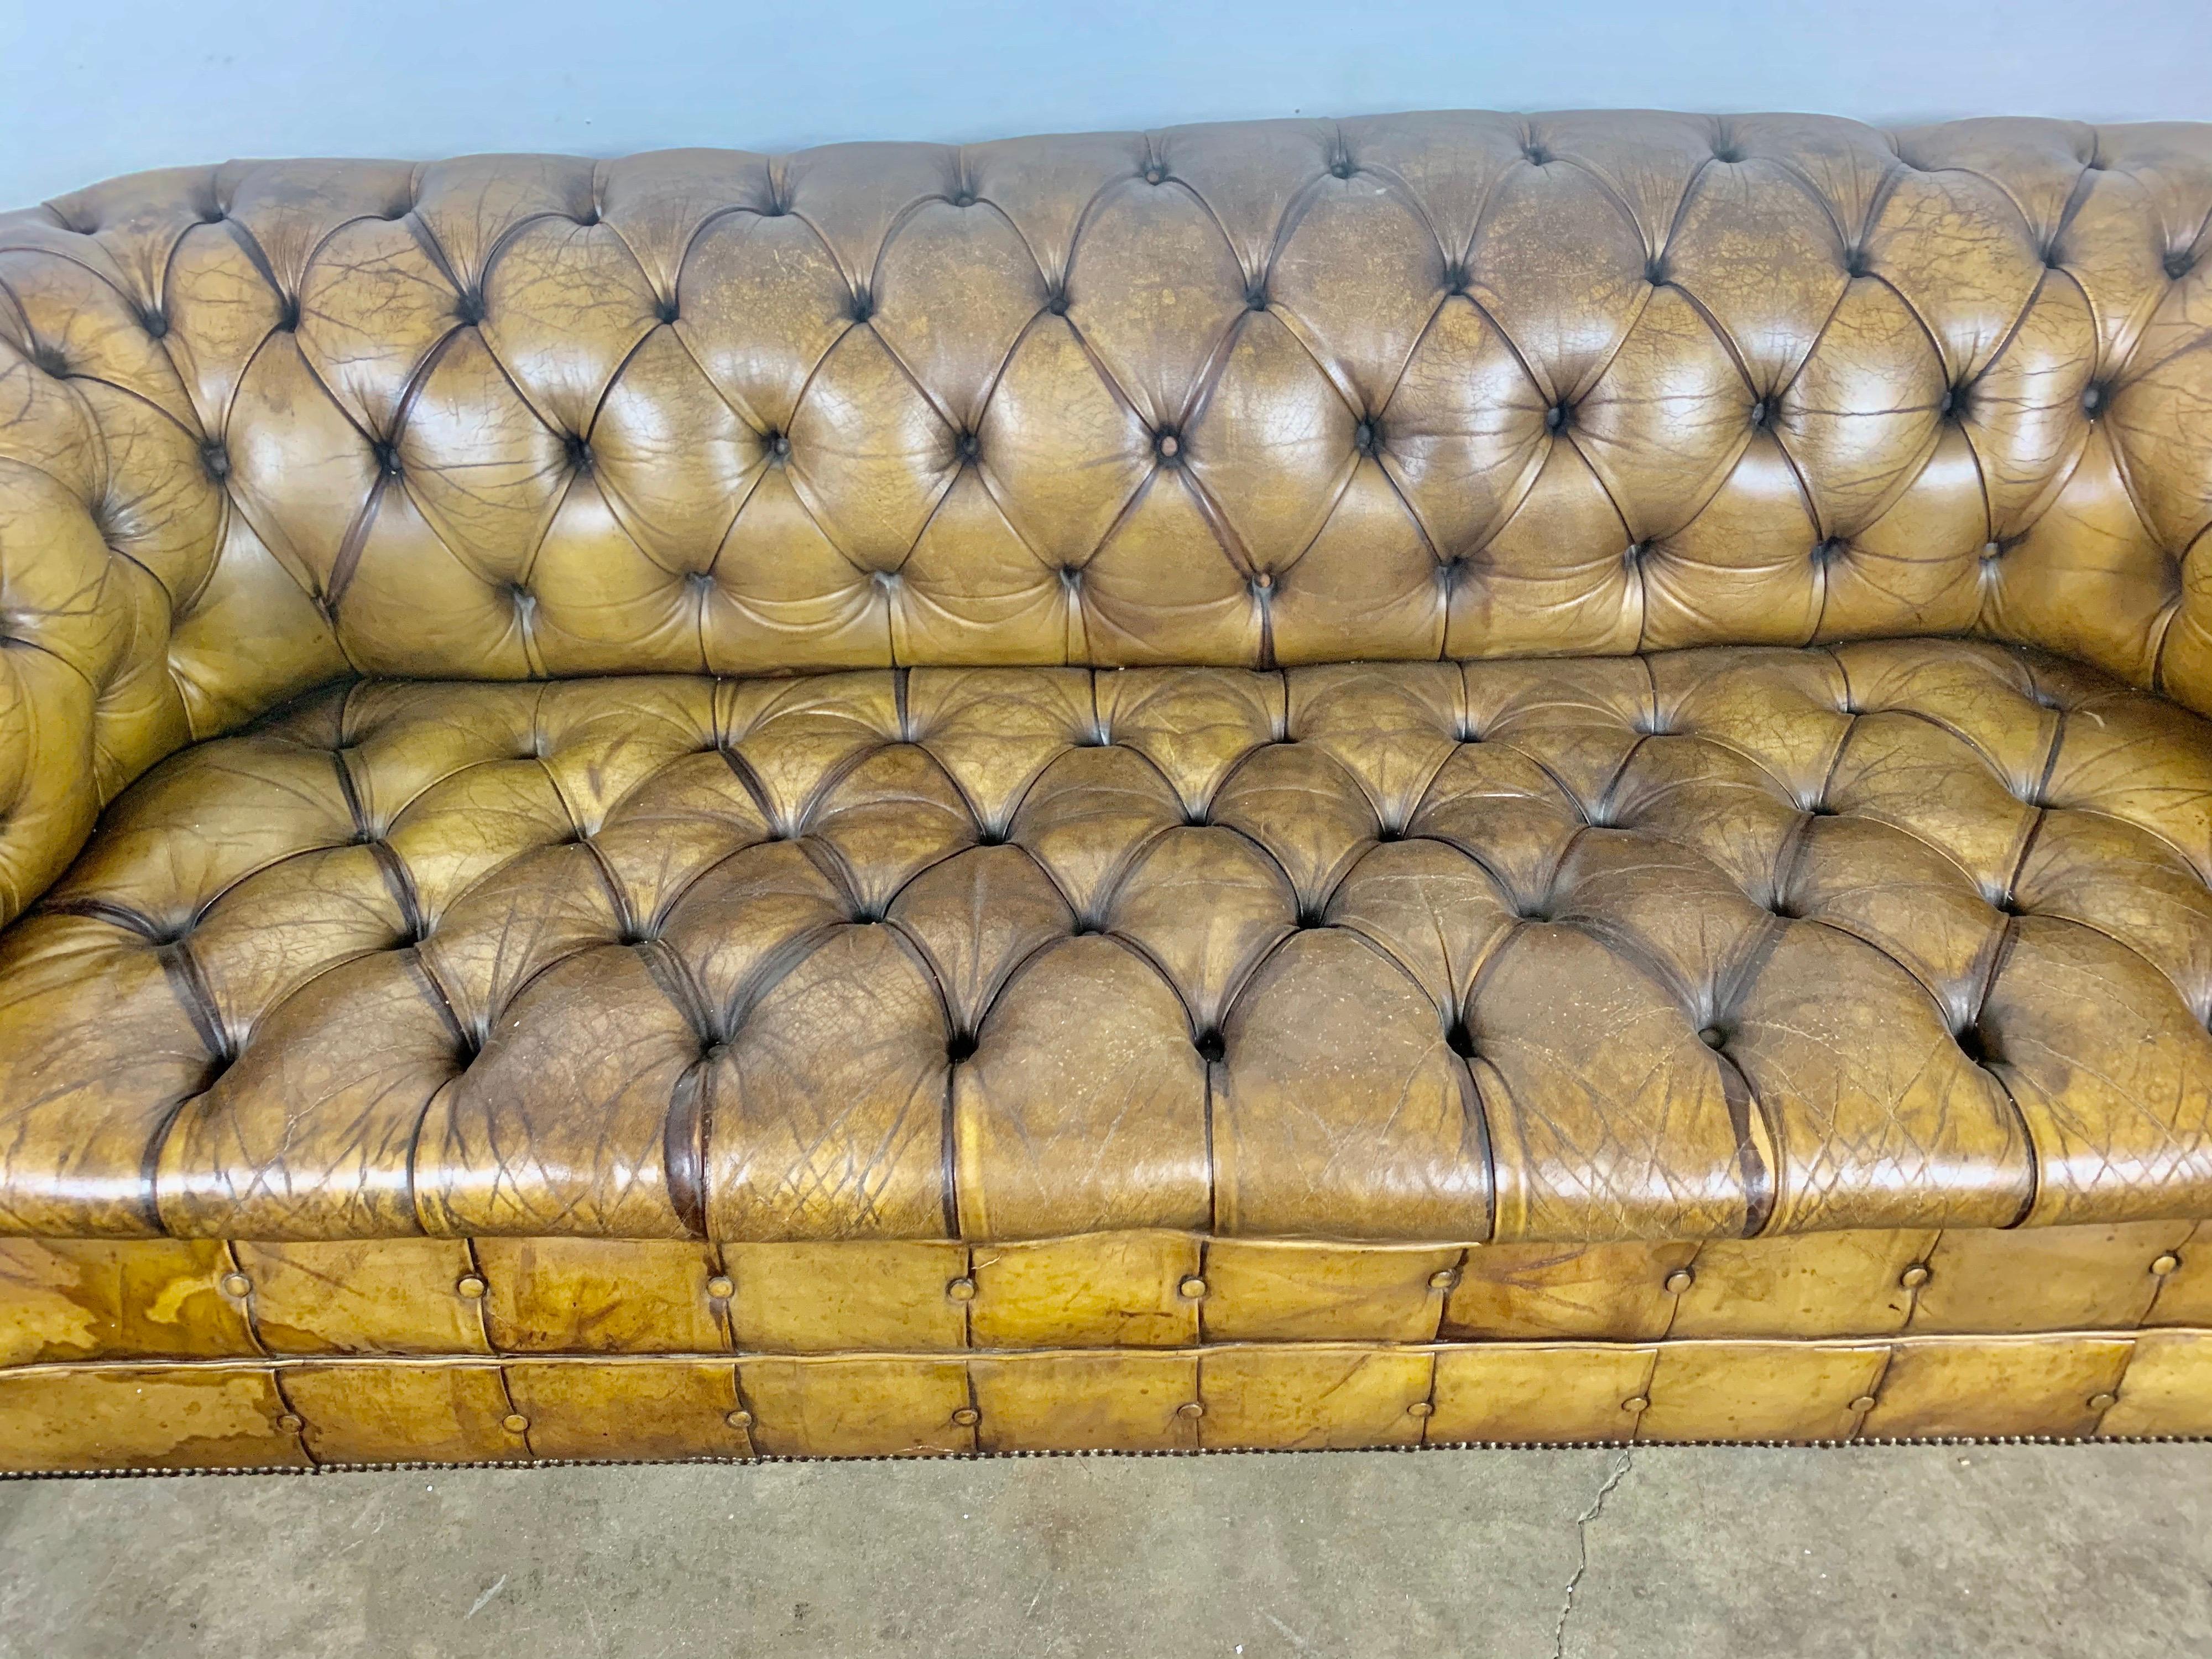 Handsome English leather tufted Chesterfield style sofa with lion paw feet and nailhead trim detail. The leather is beautiful worn with distressing throughout showing the history it has had along the way. Light tobacco color.